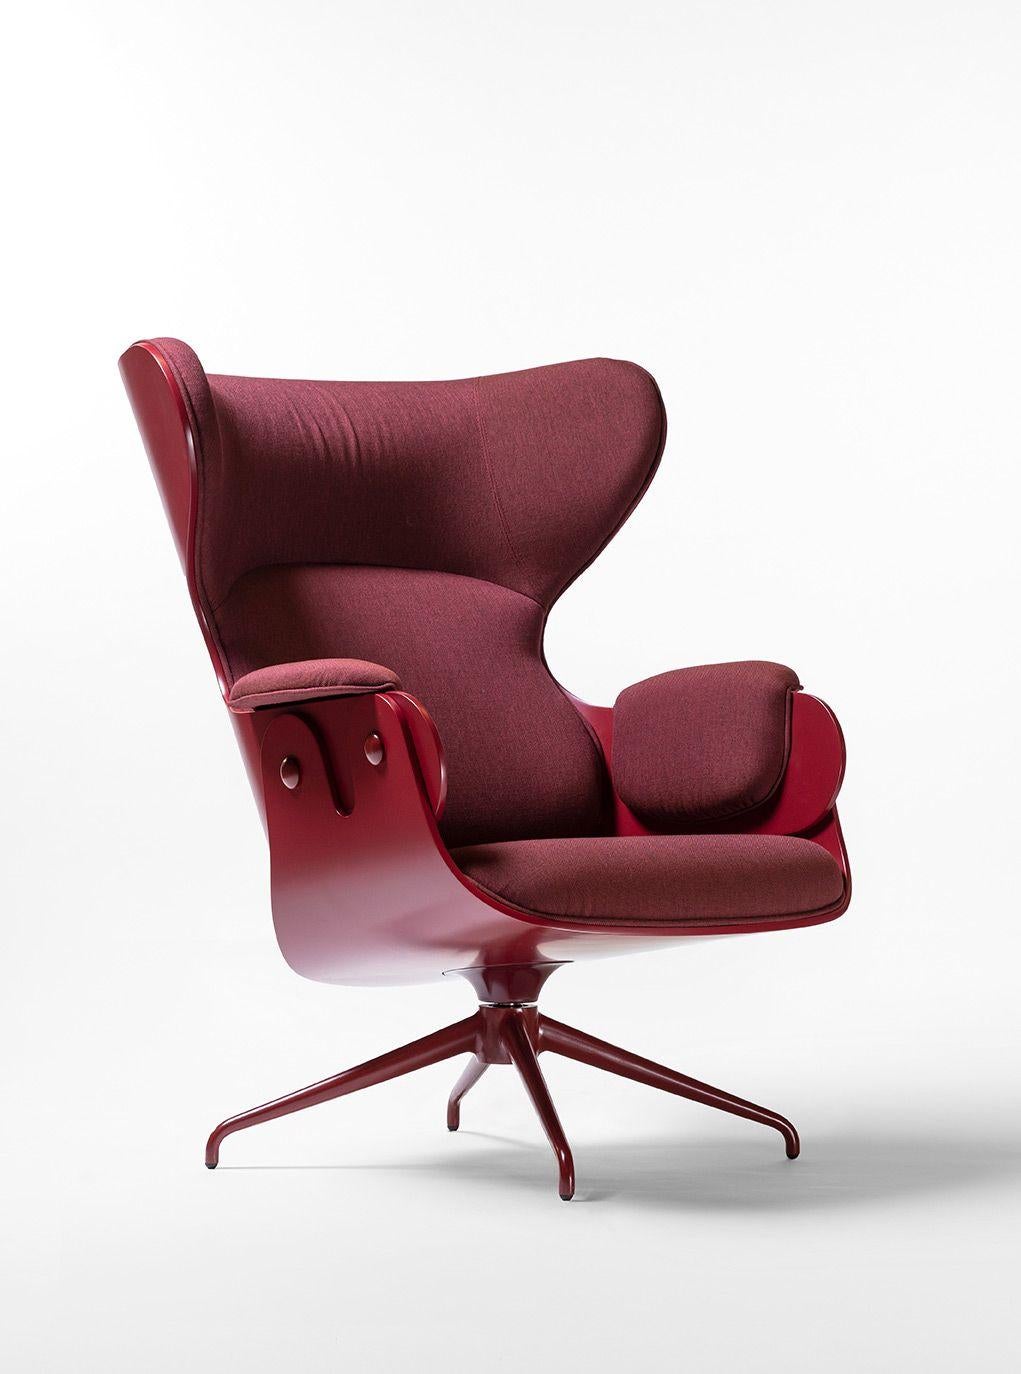 Armchair designed by Jaime Hayon in 2010.
Manufactured by BD in Spain.

It has an elegance carried throughout the series, the comfort that this typology requires in an armchair and the unmistakable hallmark in Hayon’s designs – contrasts between